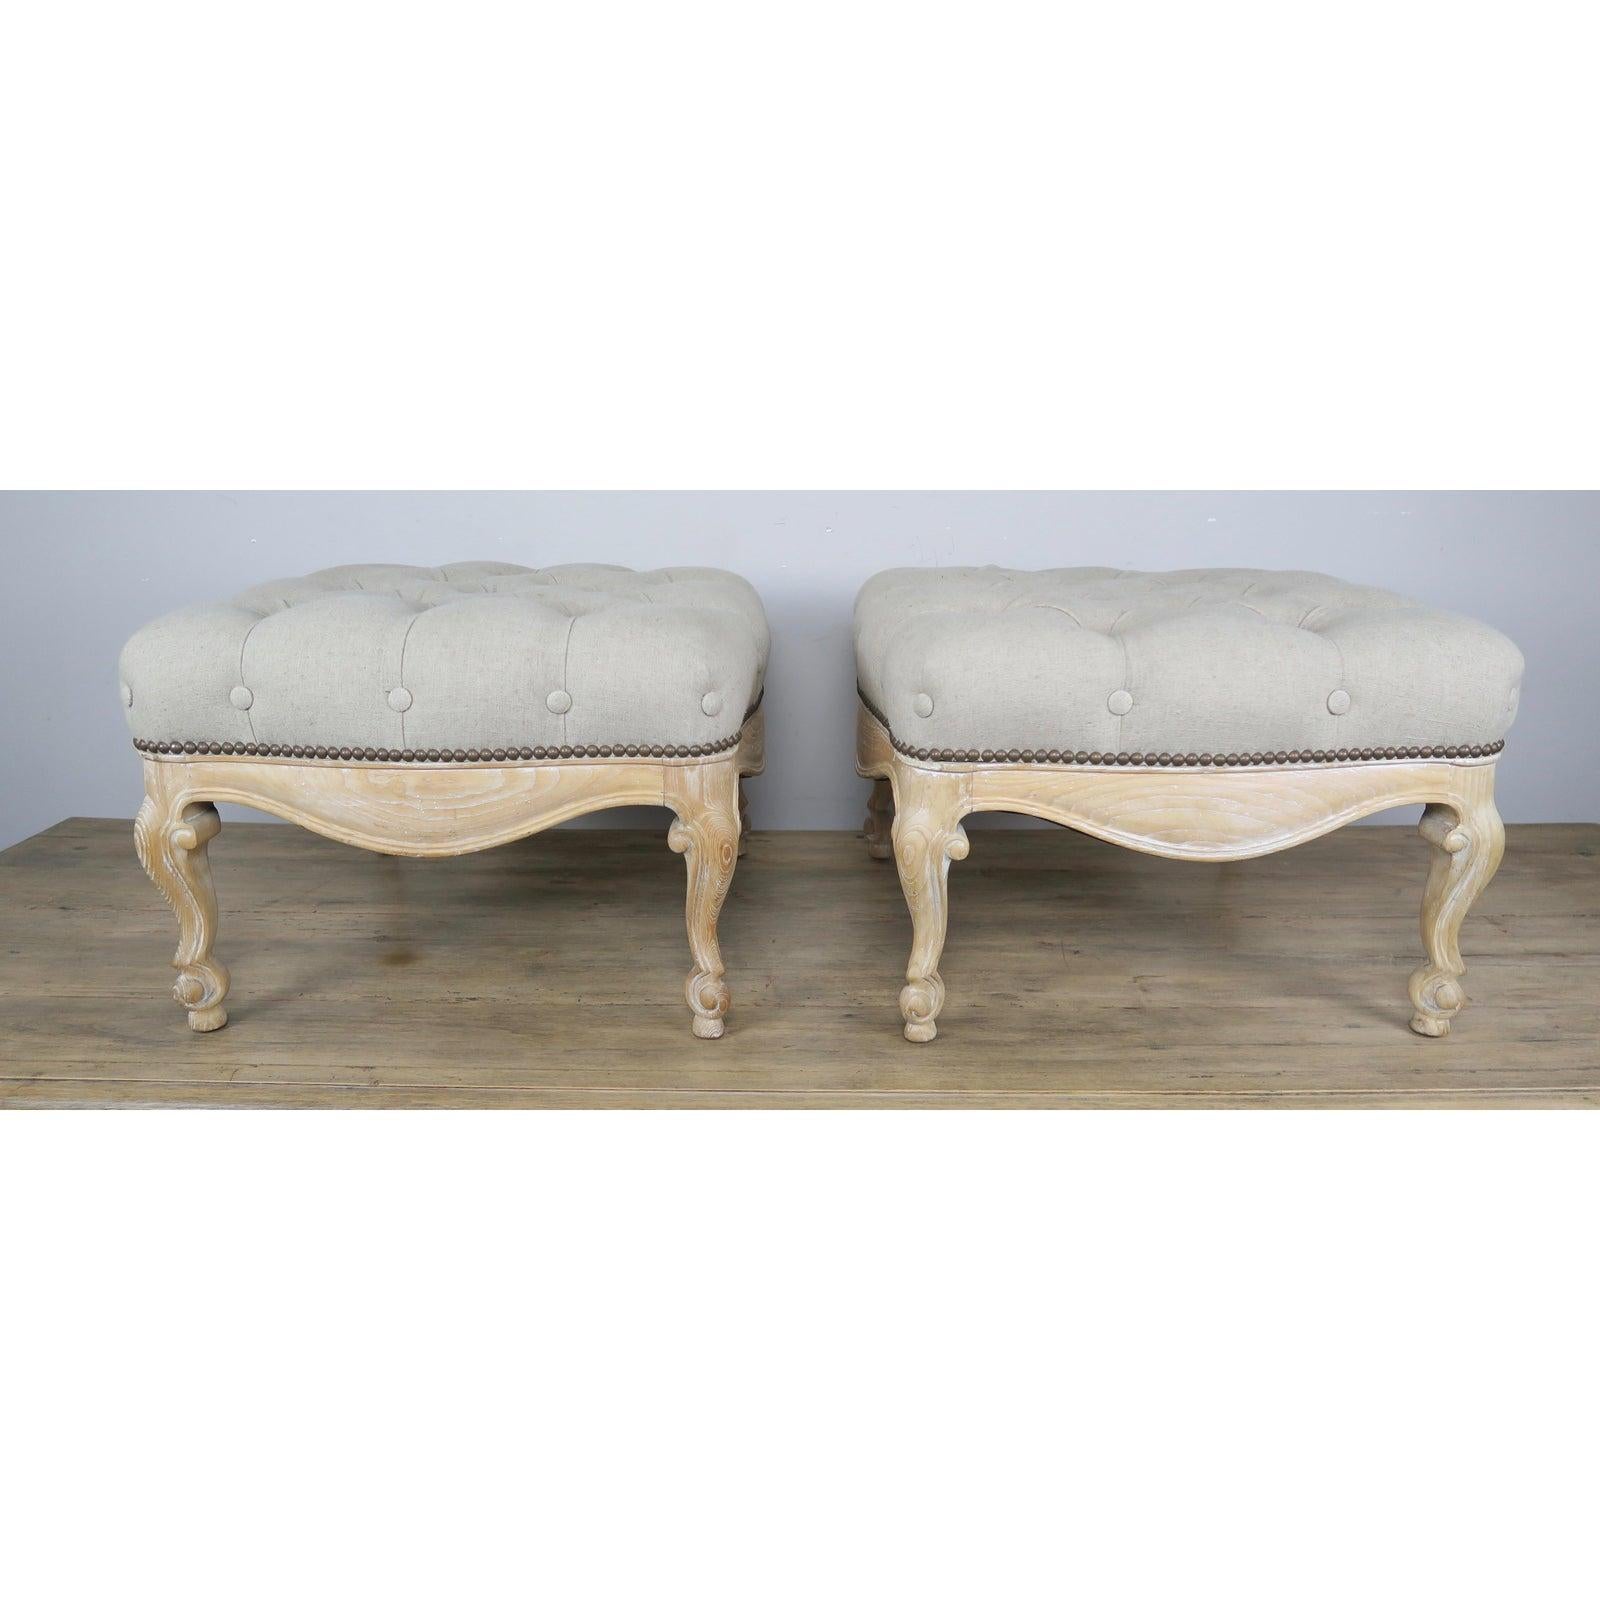 Pair of French Louis XV style natural wood benches newly upholstered in a neutral tufted Belgium linen textile and finished with antique colored brass nailhead trim.